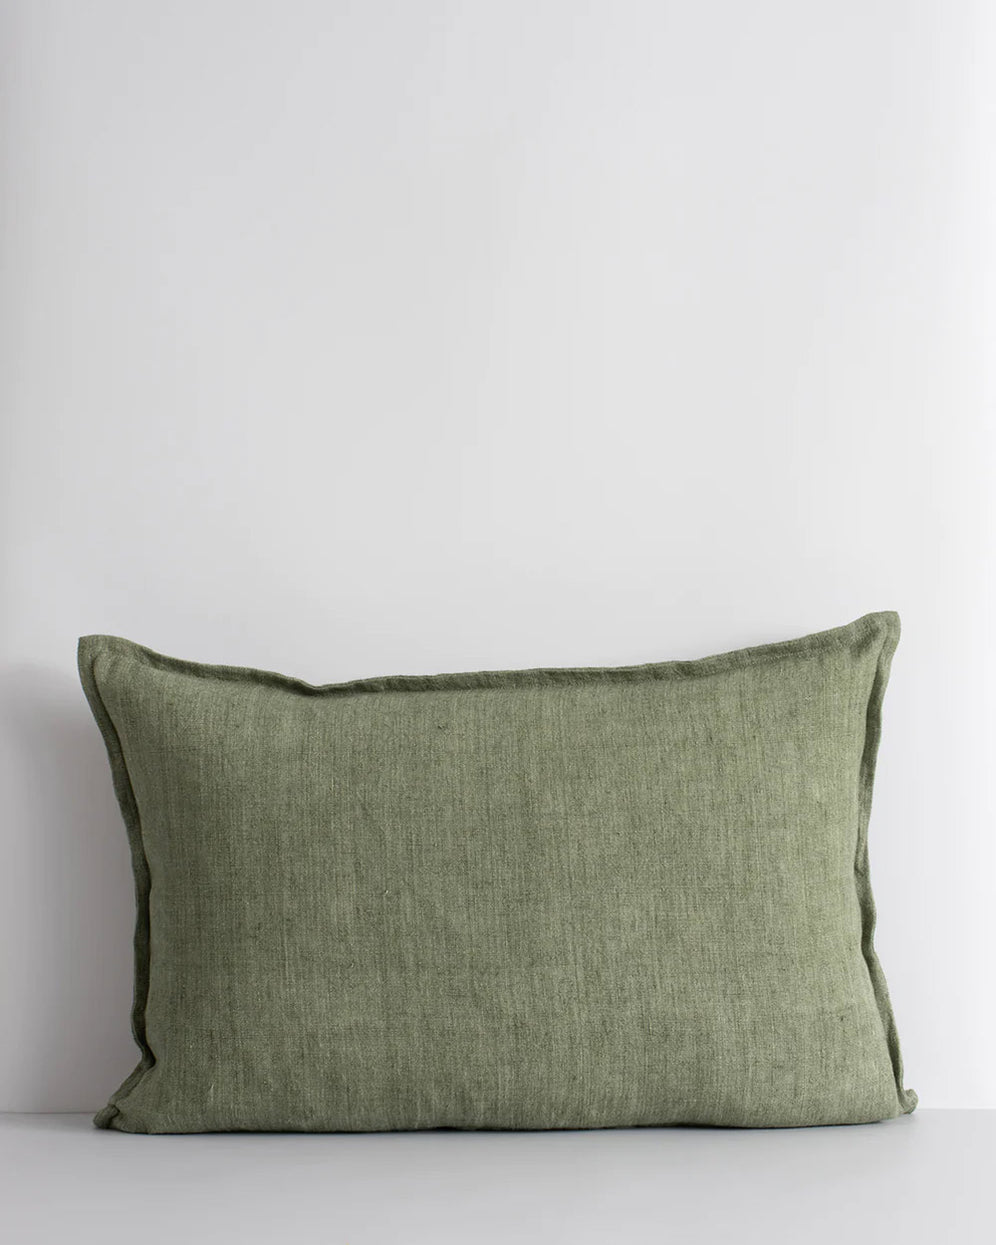 Shop On-Trend Cushions and Cushions Covers for a Stylish Home– Ink & Brayer